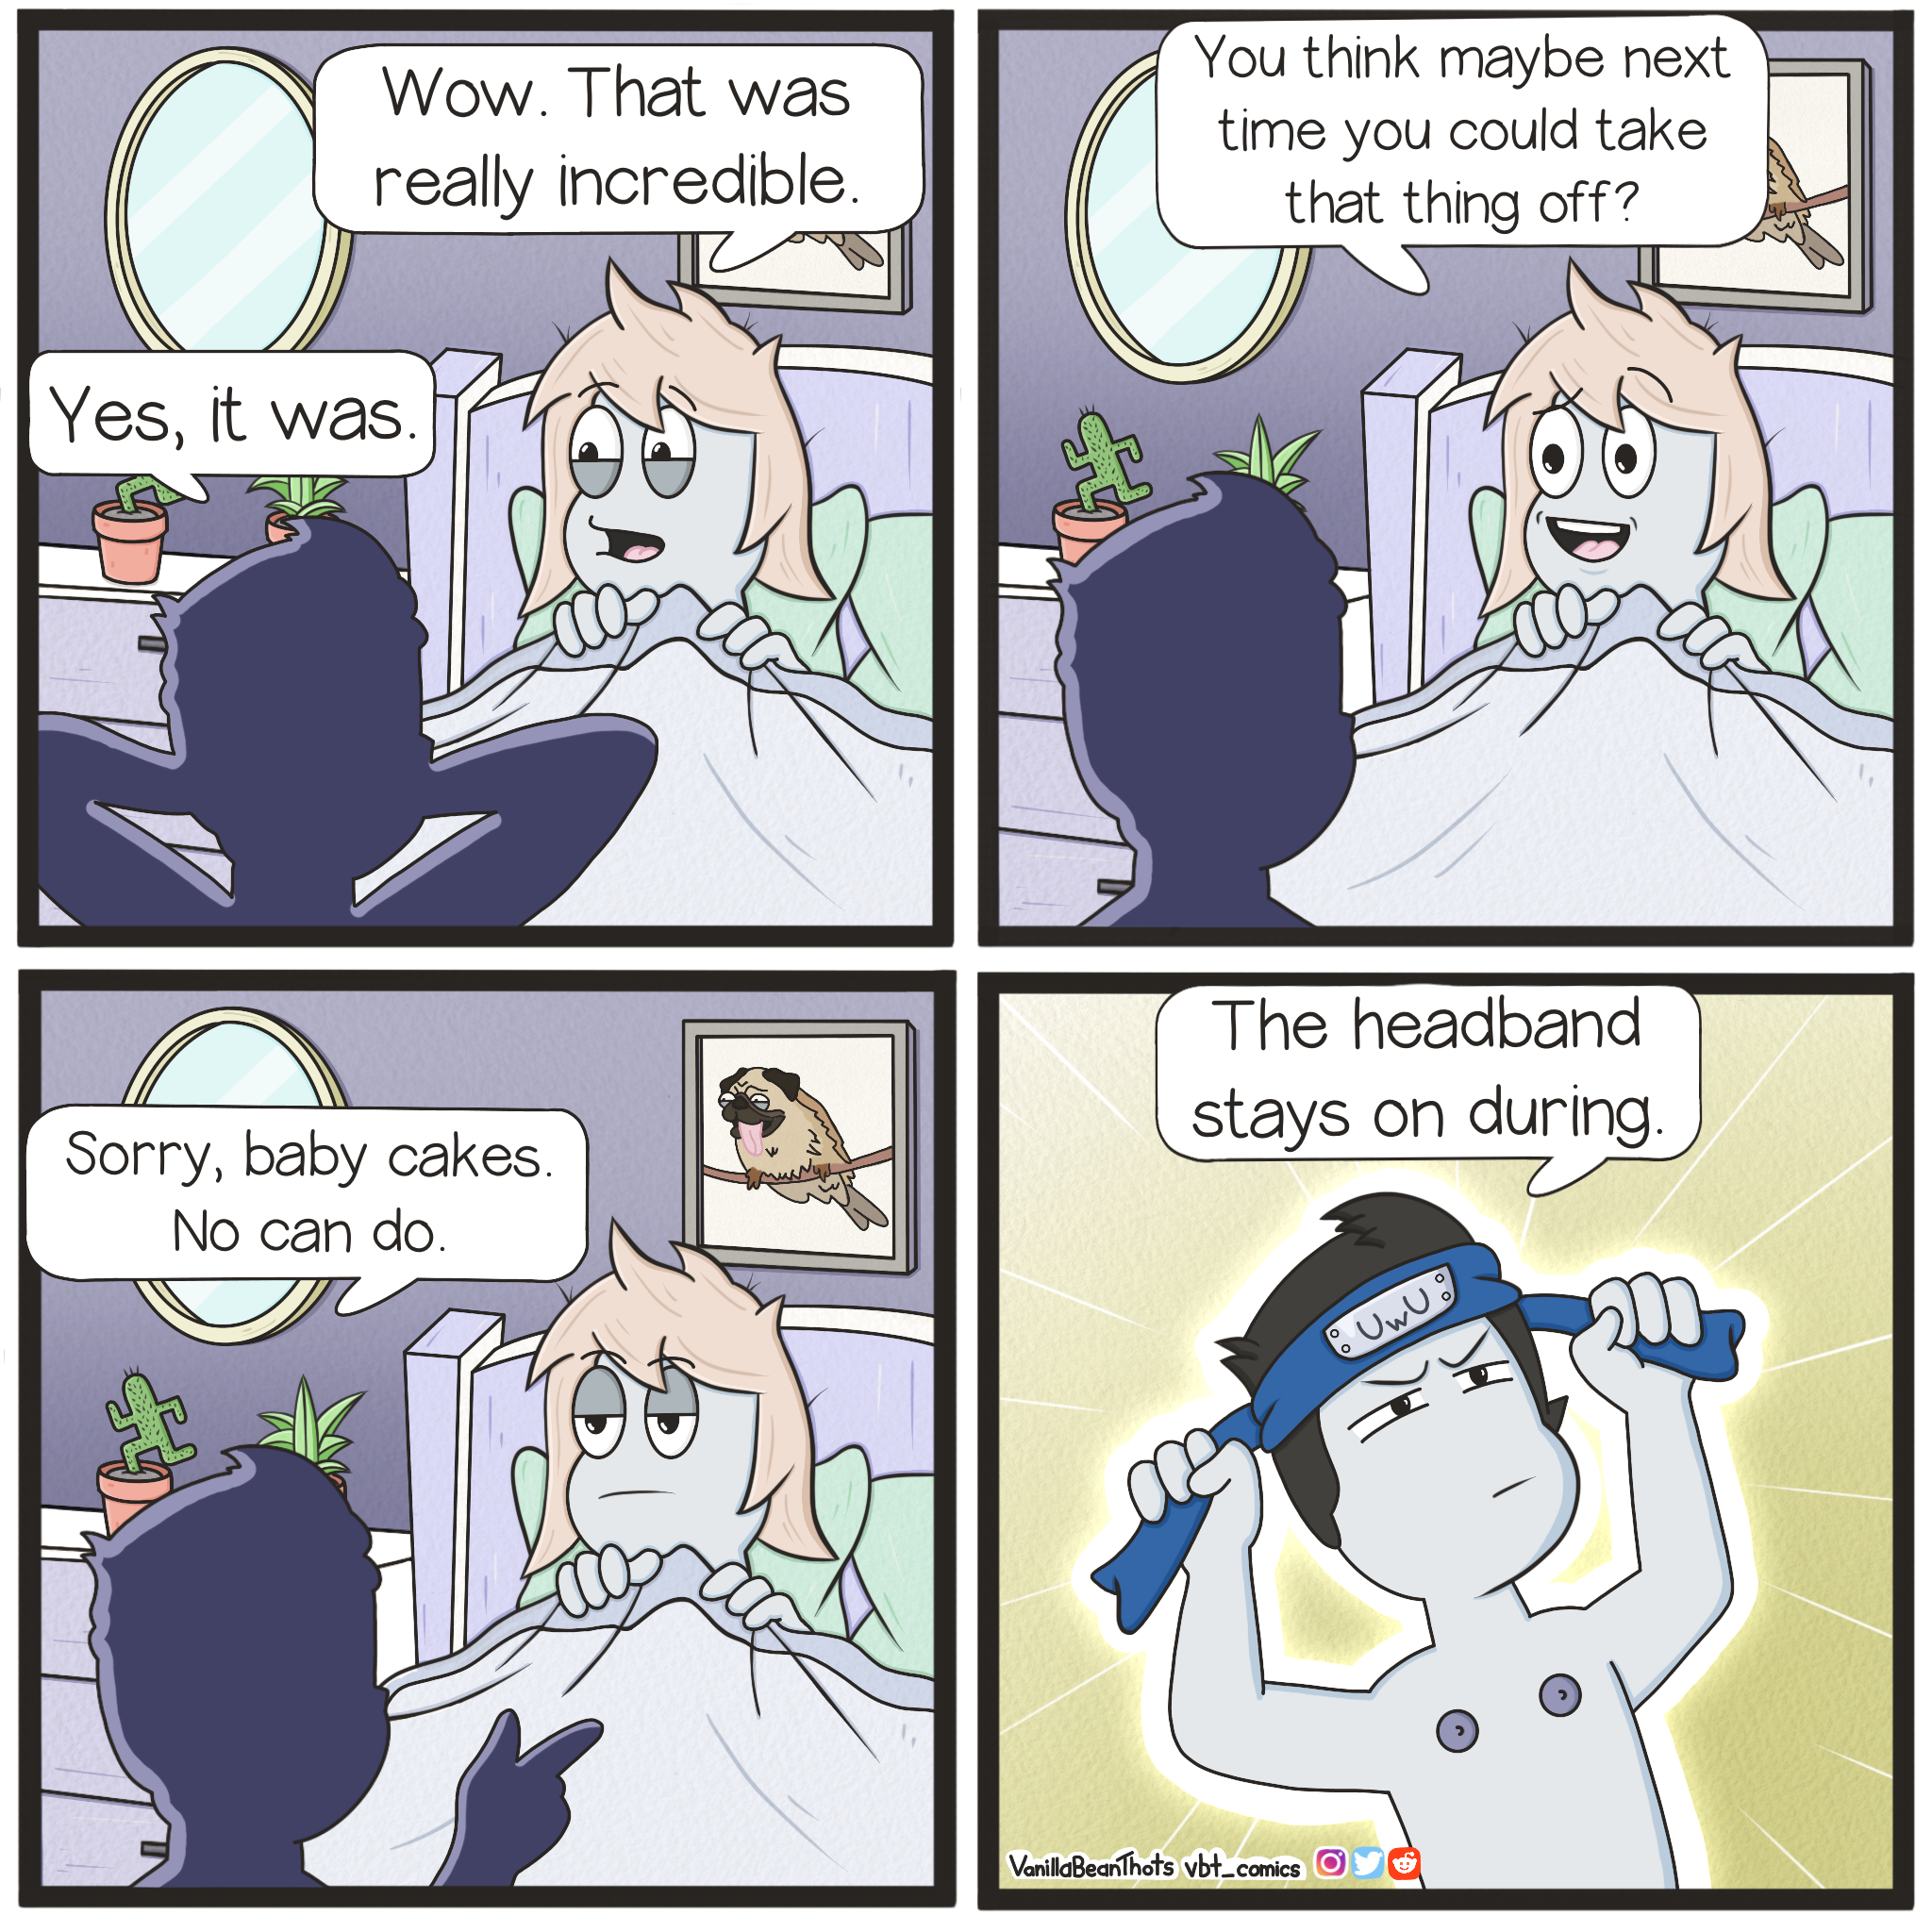 funny memems and tweetscomics - Wow. That was really incredible. Yes, it was. Sorry, baby cakes. No can do. You think maybe next time you could take that thing off? The headband stays on during. VarieThat's vbt.comics Bulu